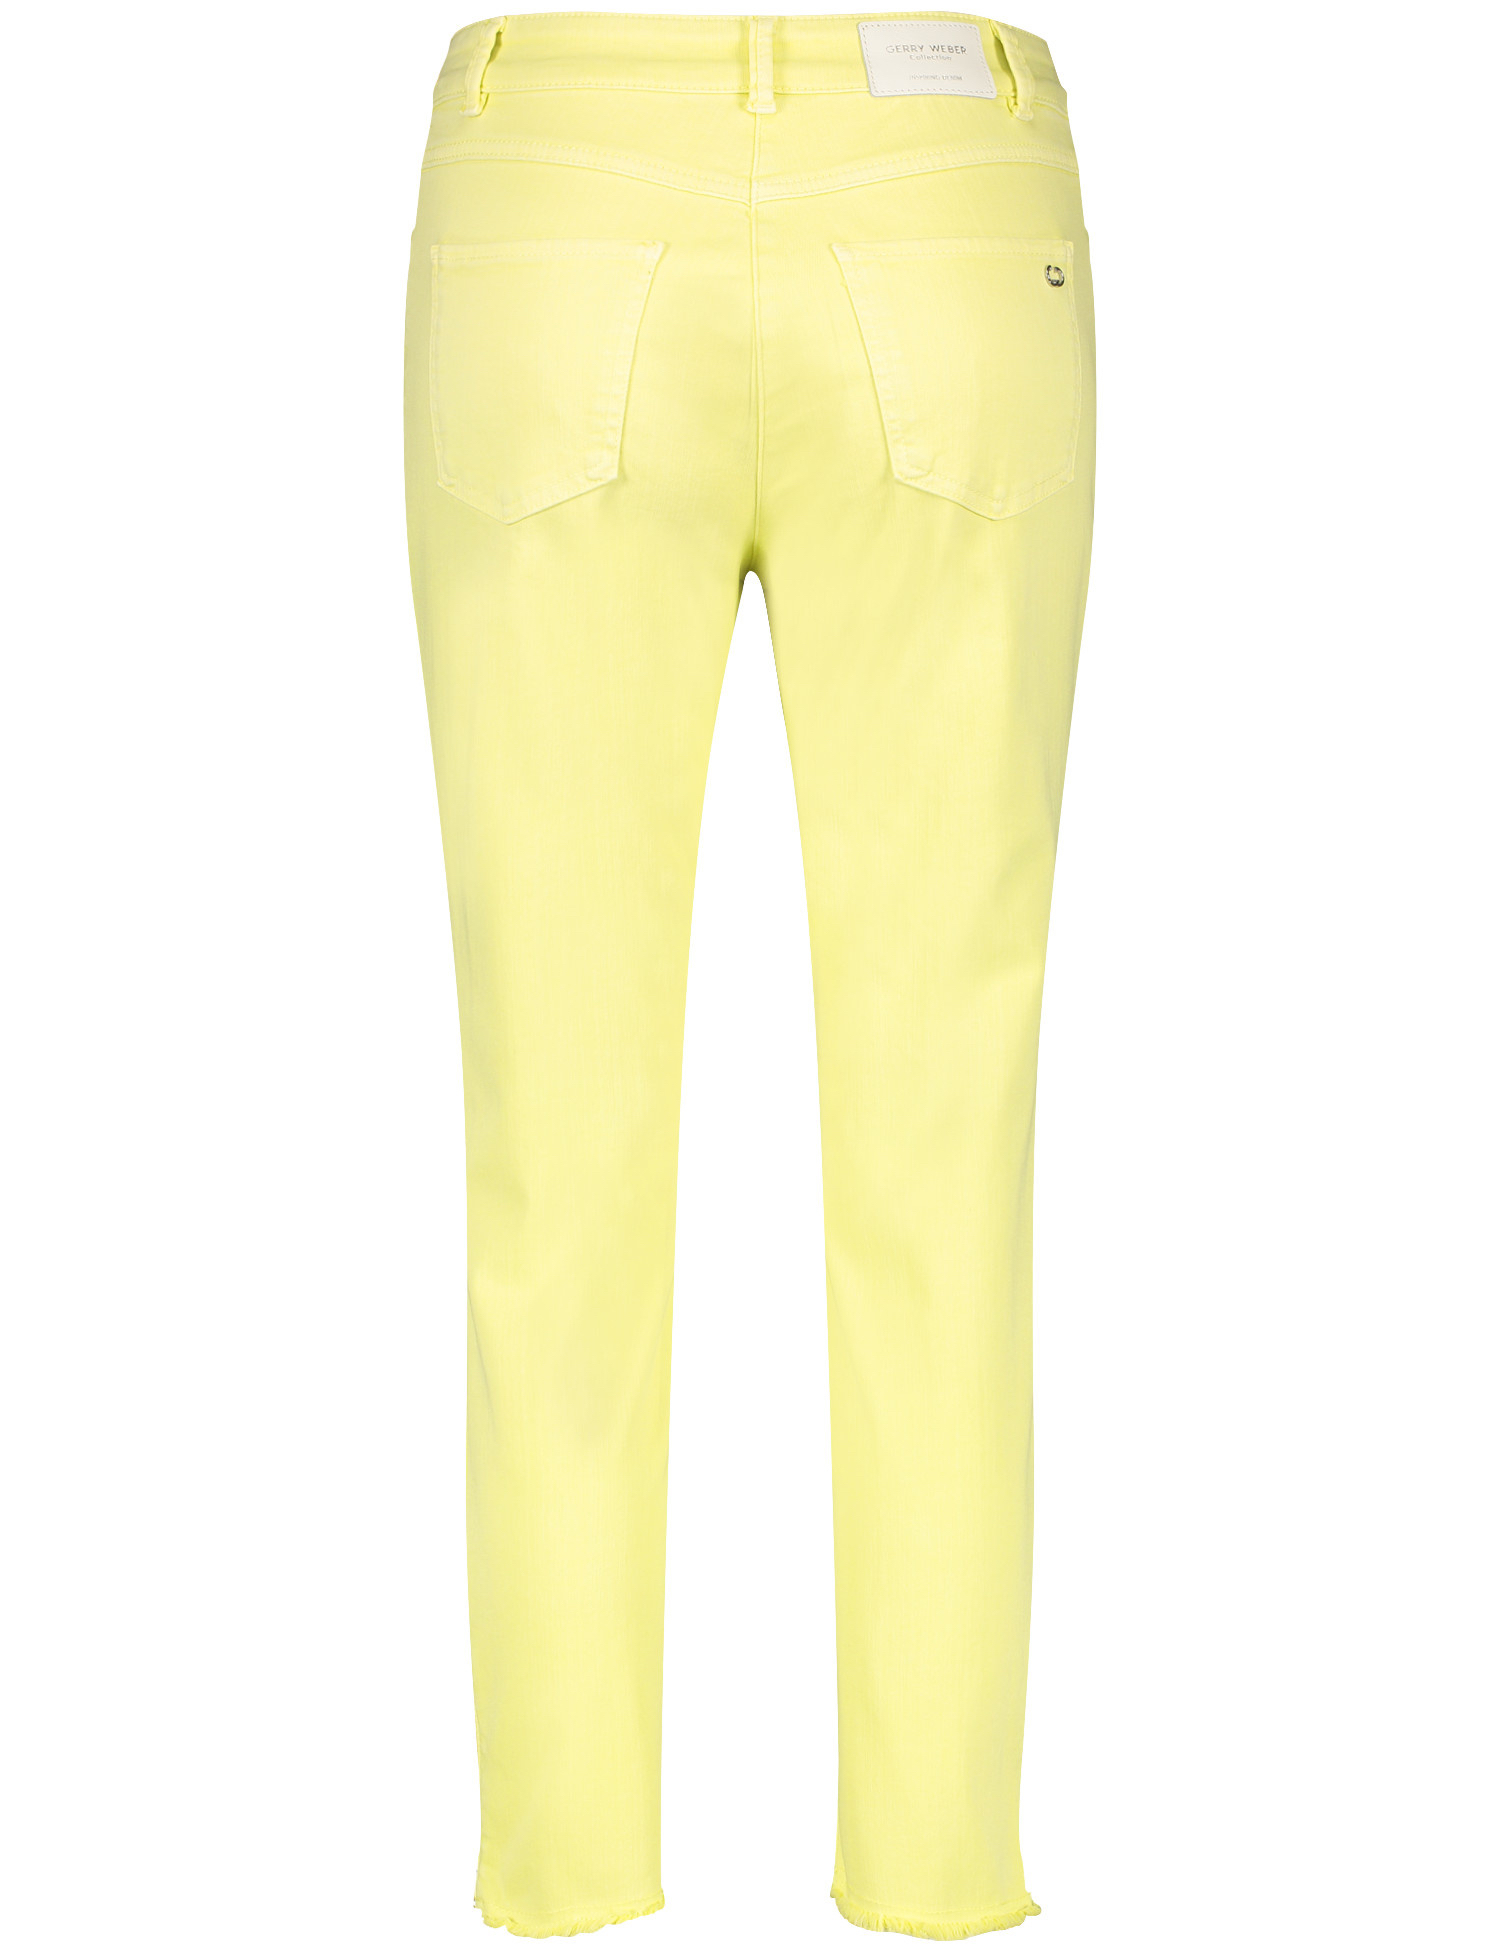 GERRY WEBER LIME TROUSERS WITH FRAYED HEM | Rosella - Style inspired by ...